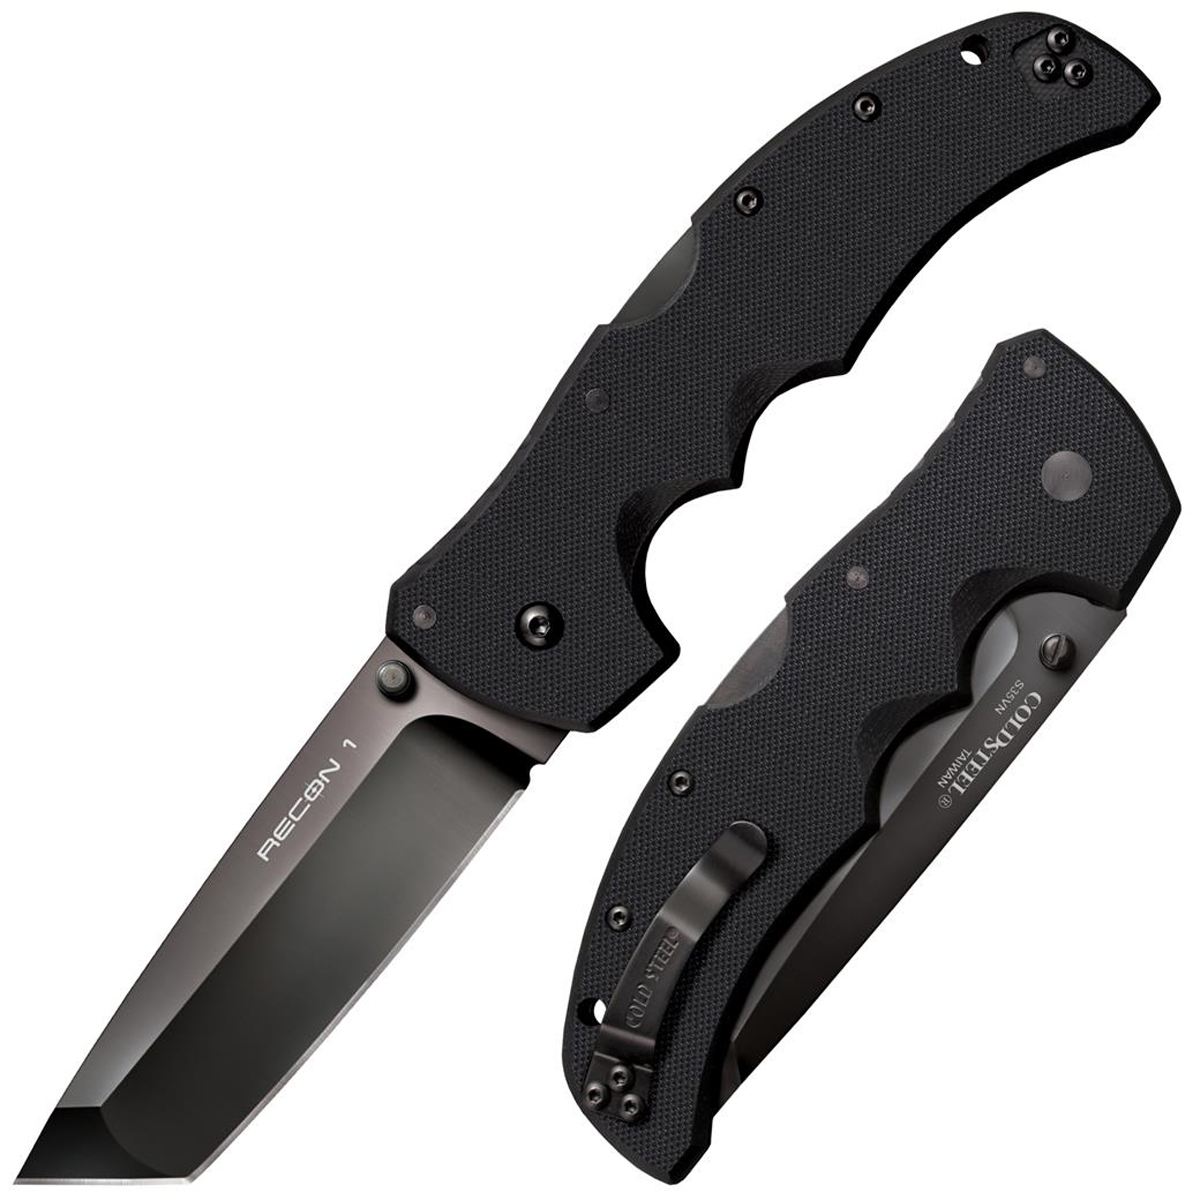 COLD STEEL RECON 1 FOLDING KNIFE main photo.